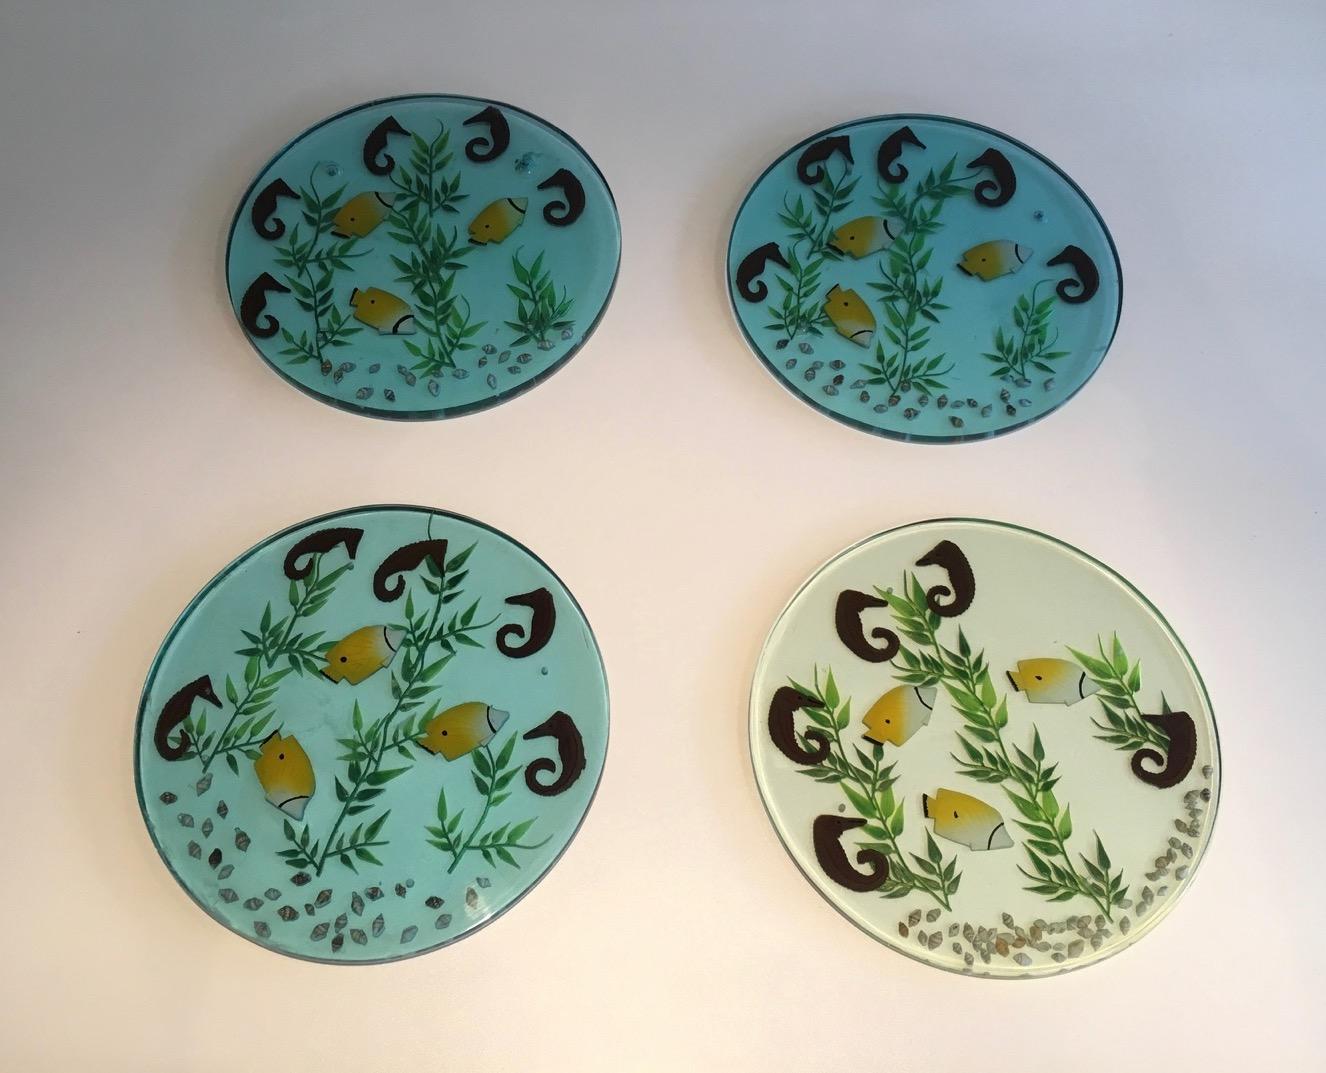 These 4 plates are made of lucite with incrusted seahorses, fishes, algues and shells. This is a French work. Circa 1970.